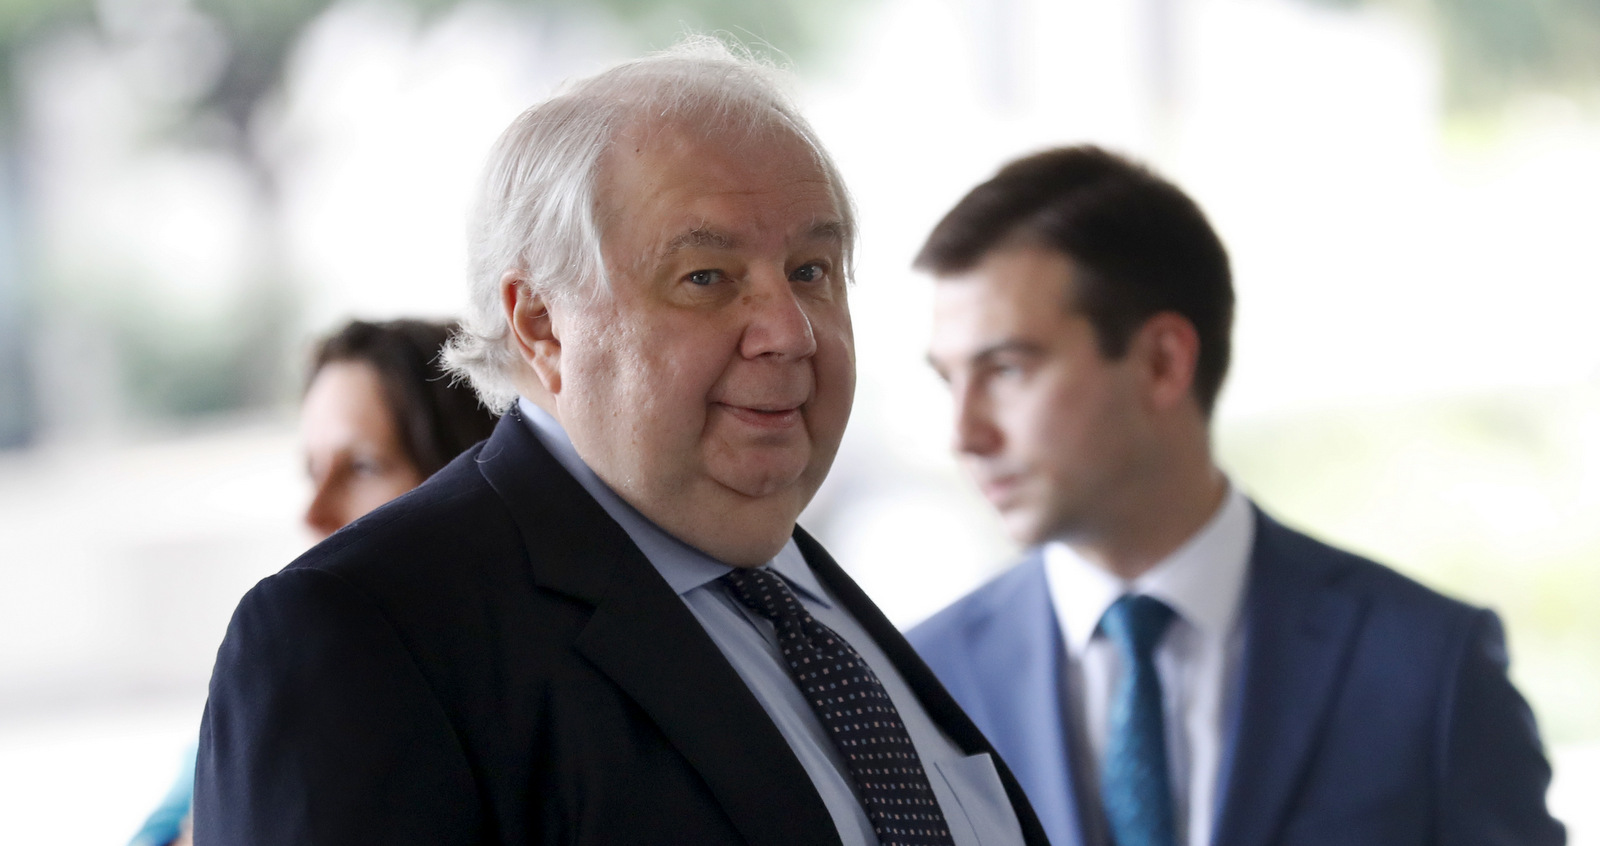 Russian Ambassador to the U.S. Sergey Kislyak arrives at the State Department in Washington, July 17, 2017, to meet with Undersecretary of State Thomas Shannon. (AP/Carolyn Kaster)